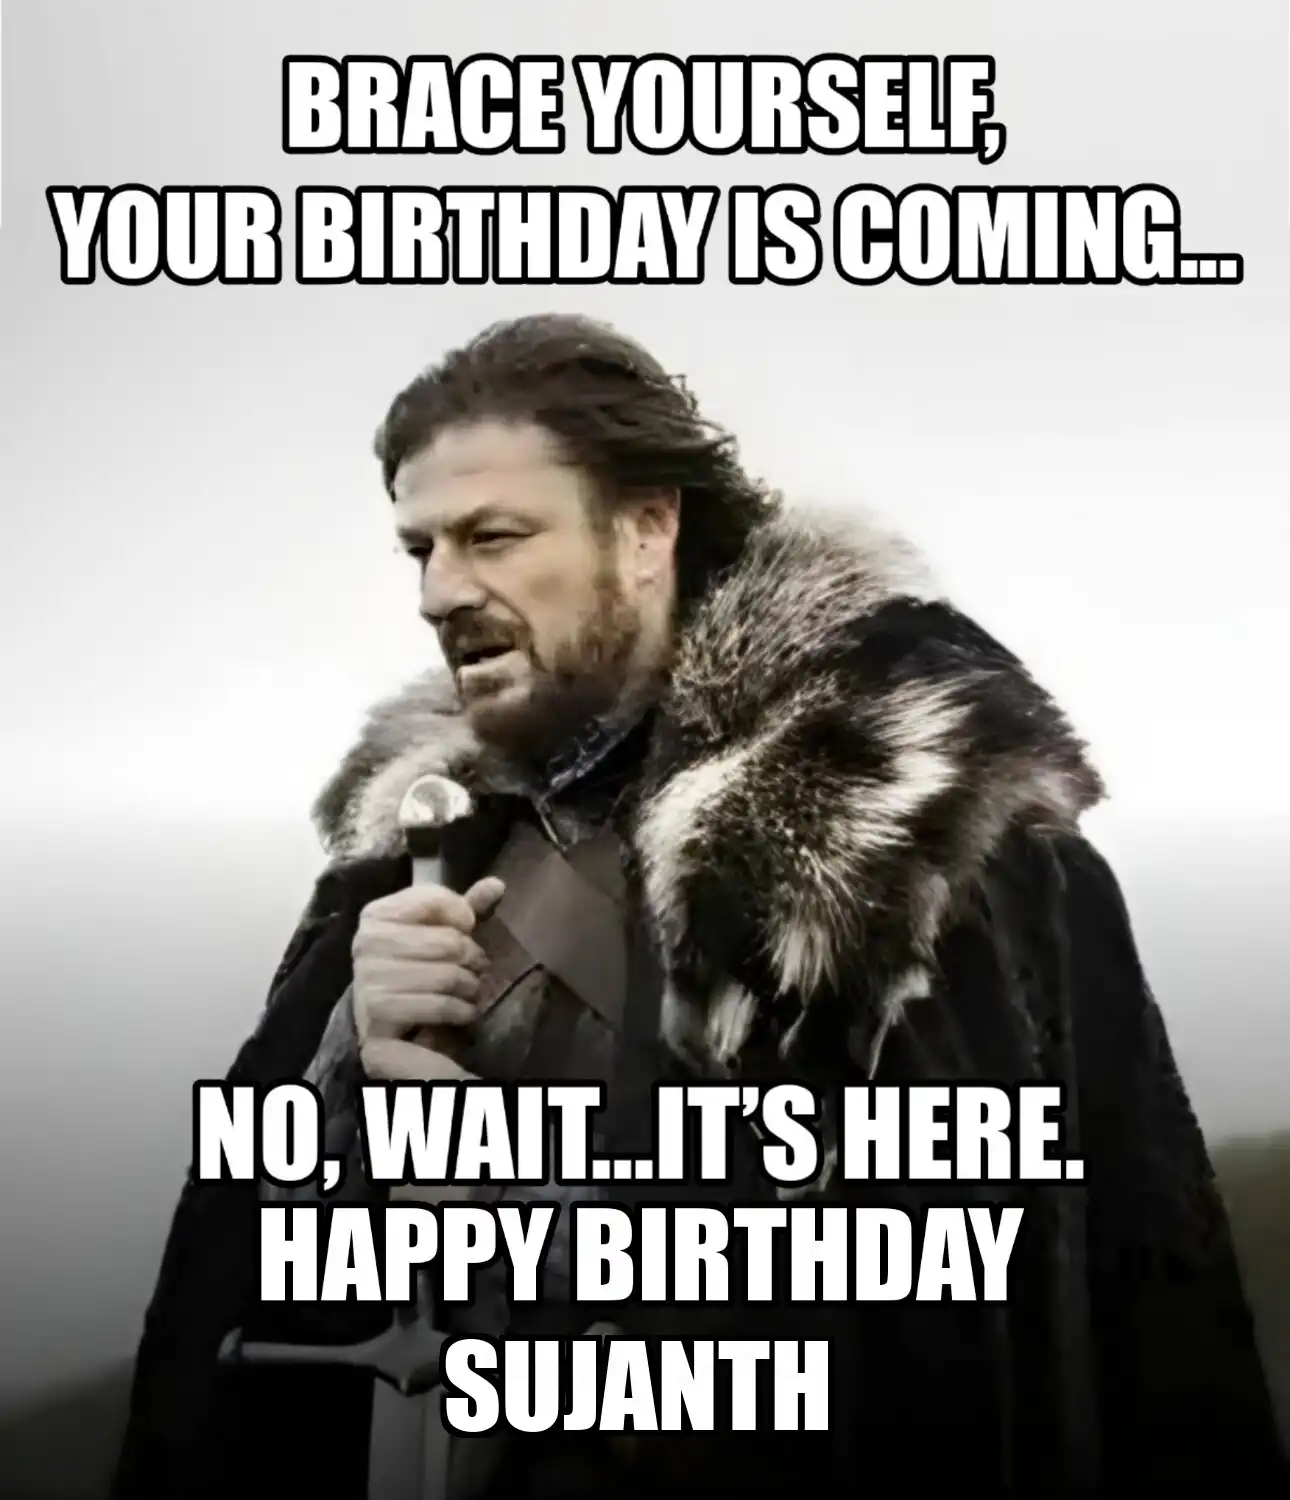 Happy Birthday Sujanth Brace Yourself Your Birthday Is Coming Meme